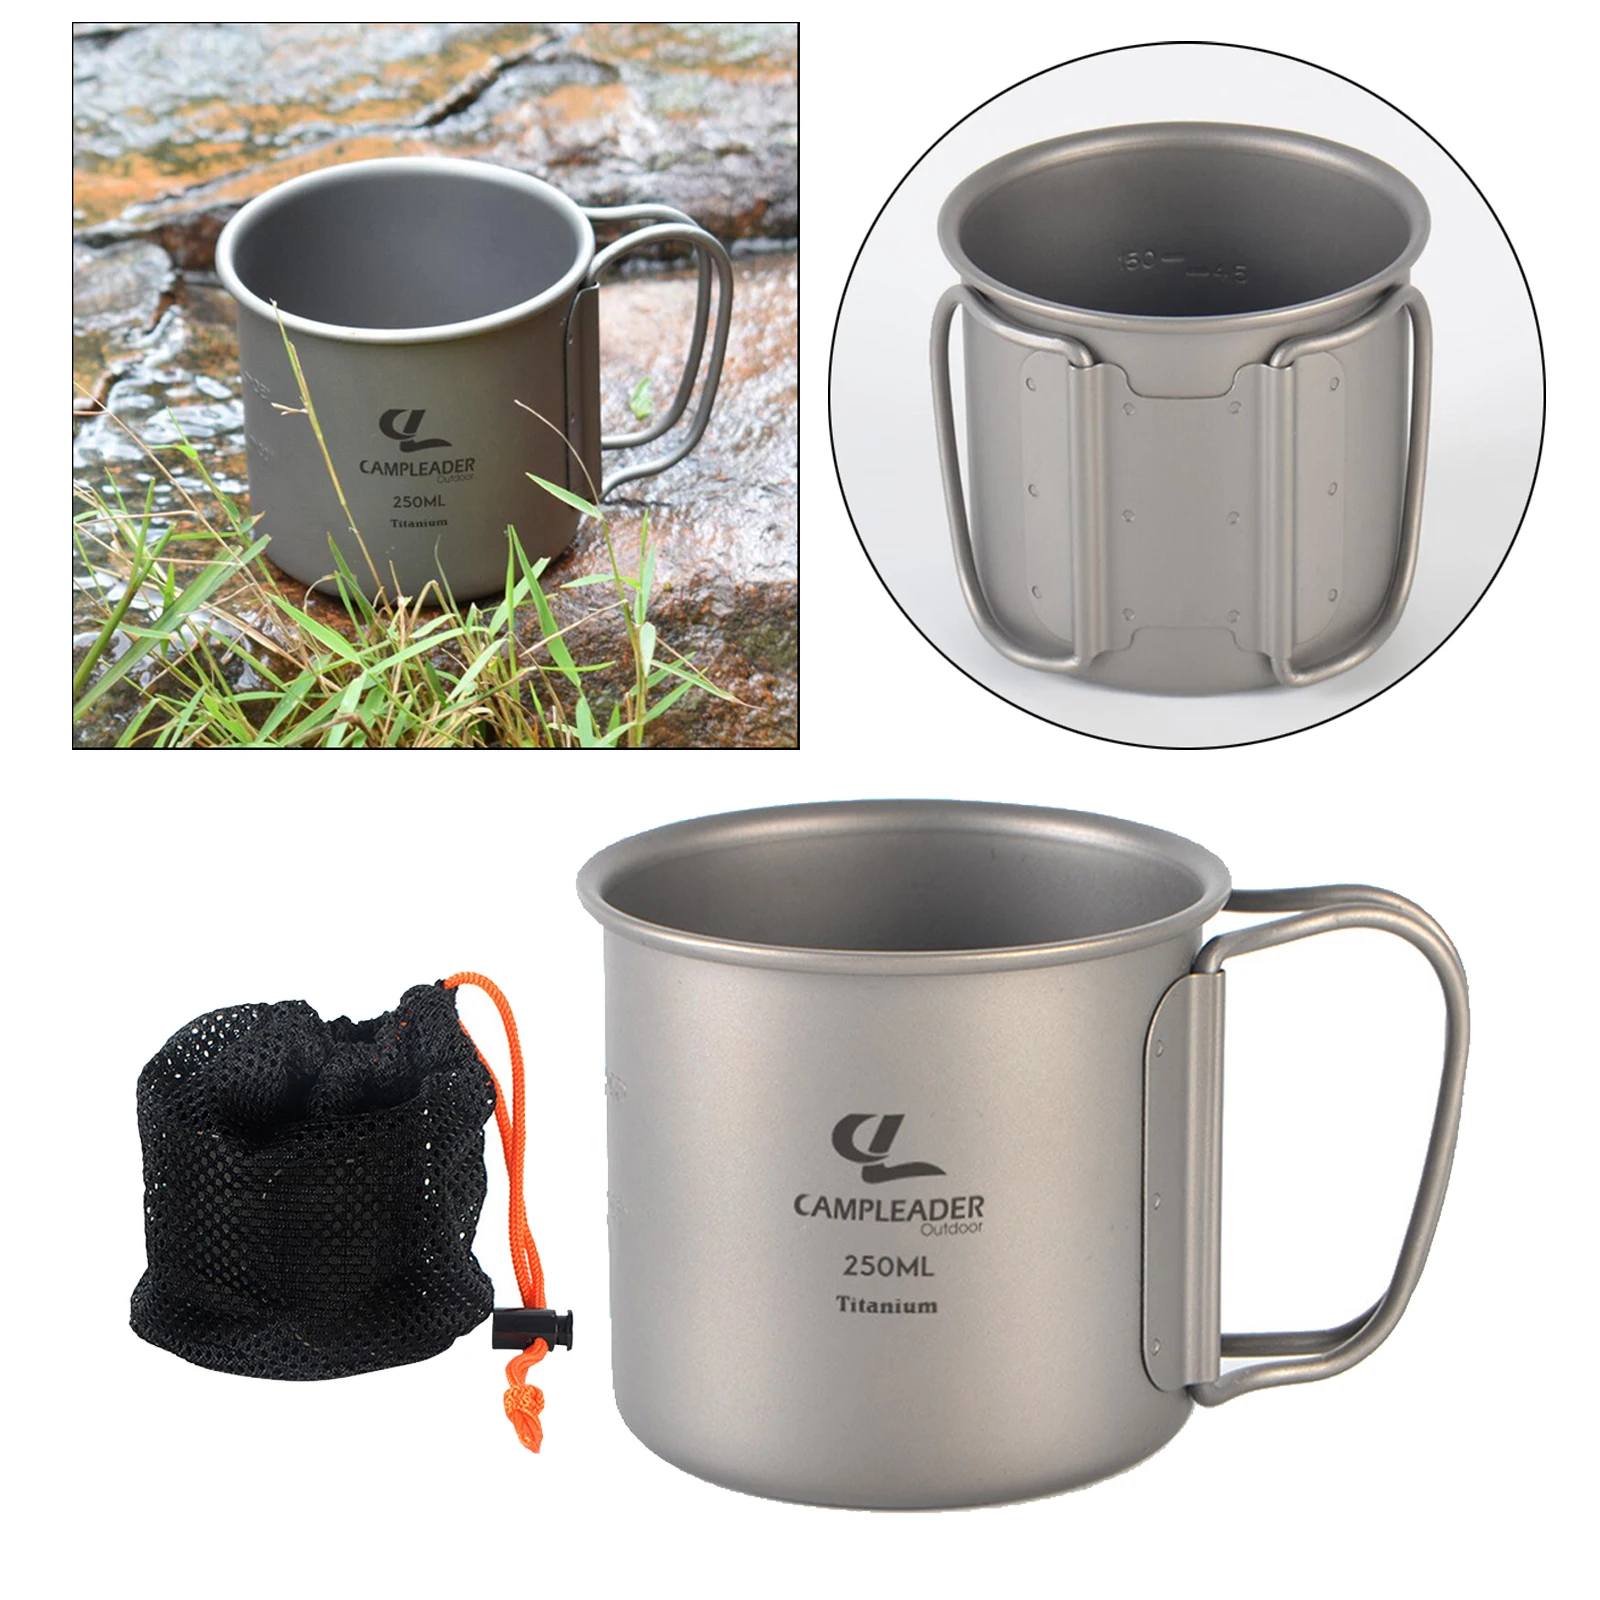 Titanium Collapsible Camping Mug Water Cup Portable Drinkware Only 40g